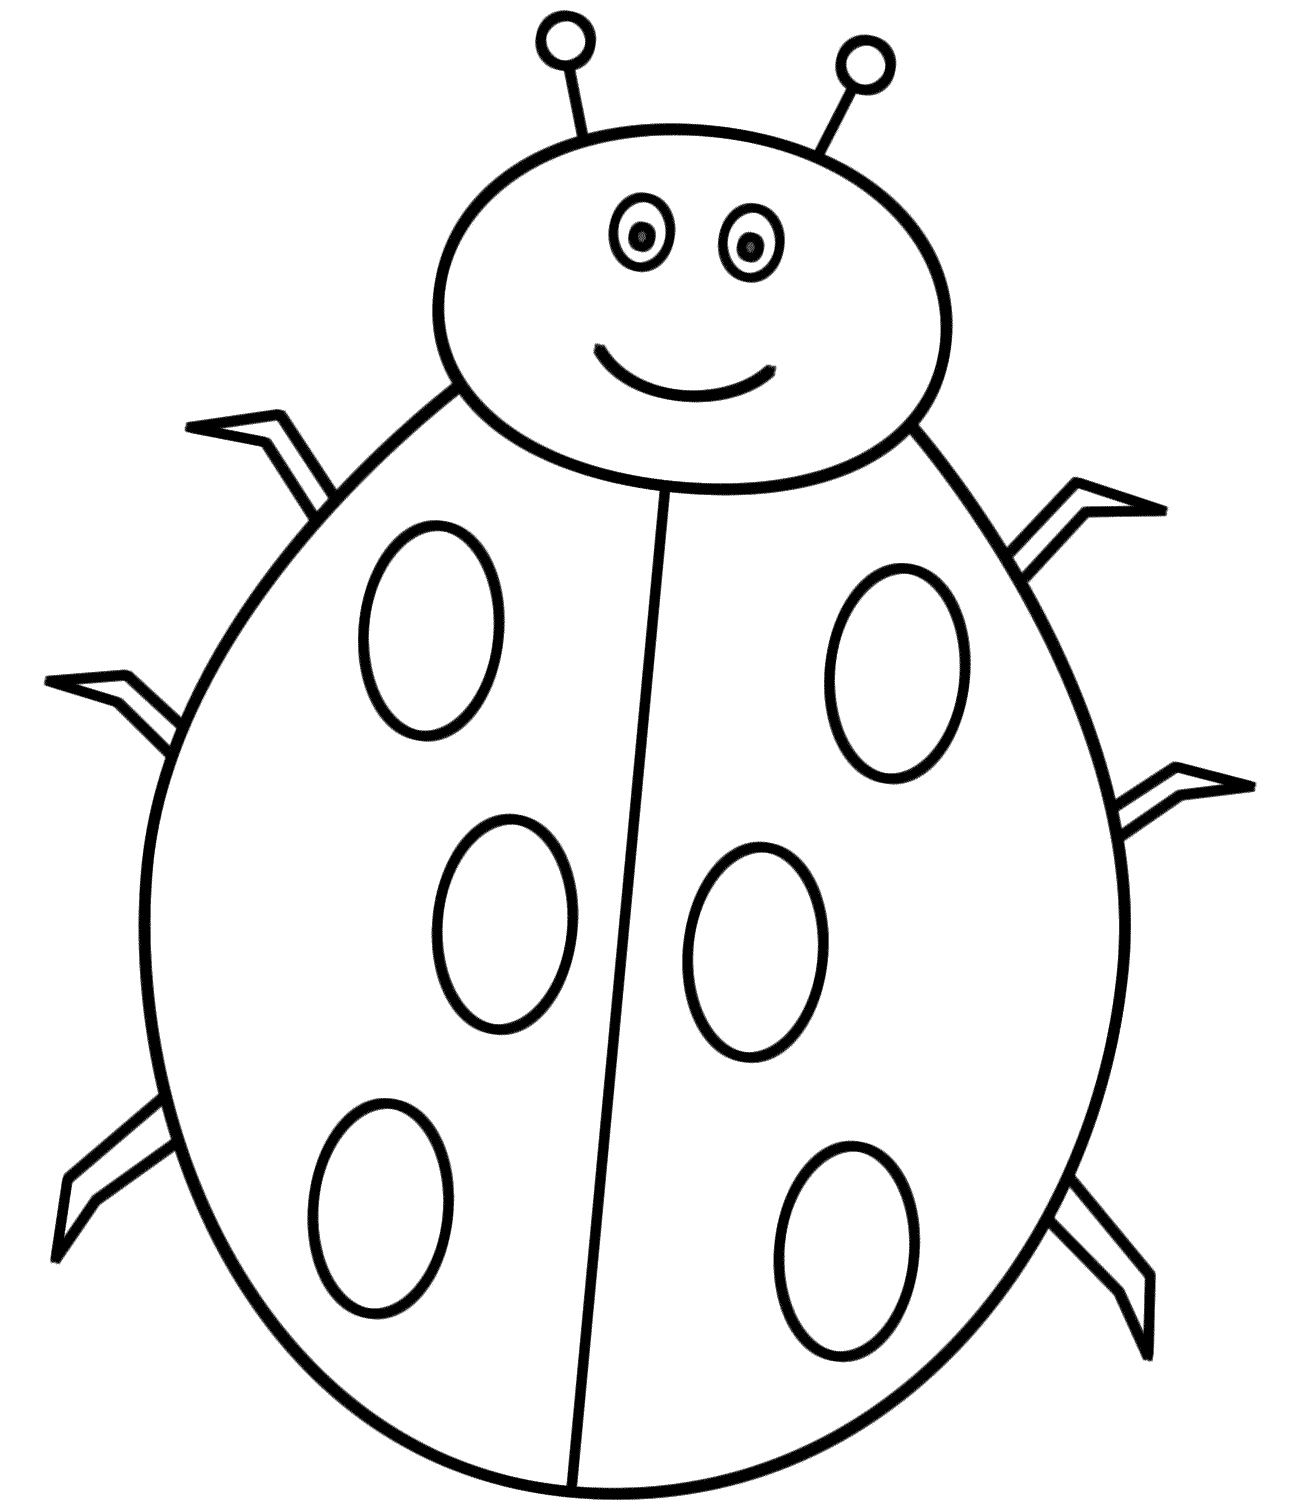 Ladybug Colouring Pages Printable - High Quality Coloring Pages